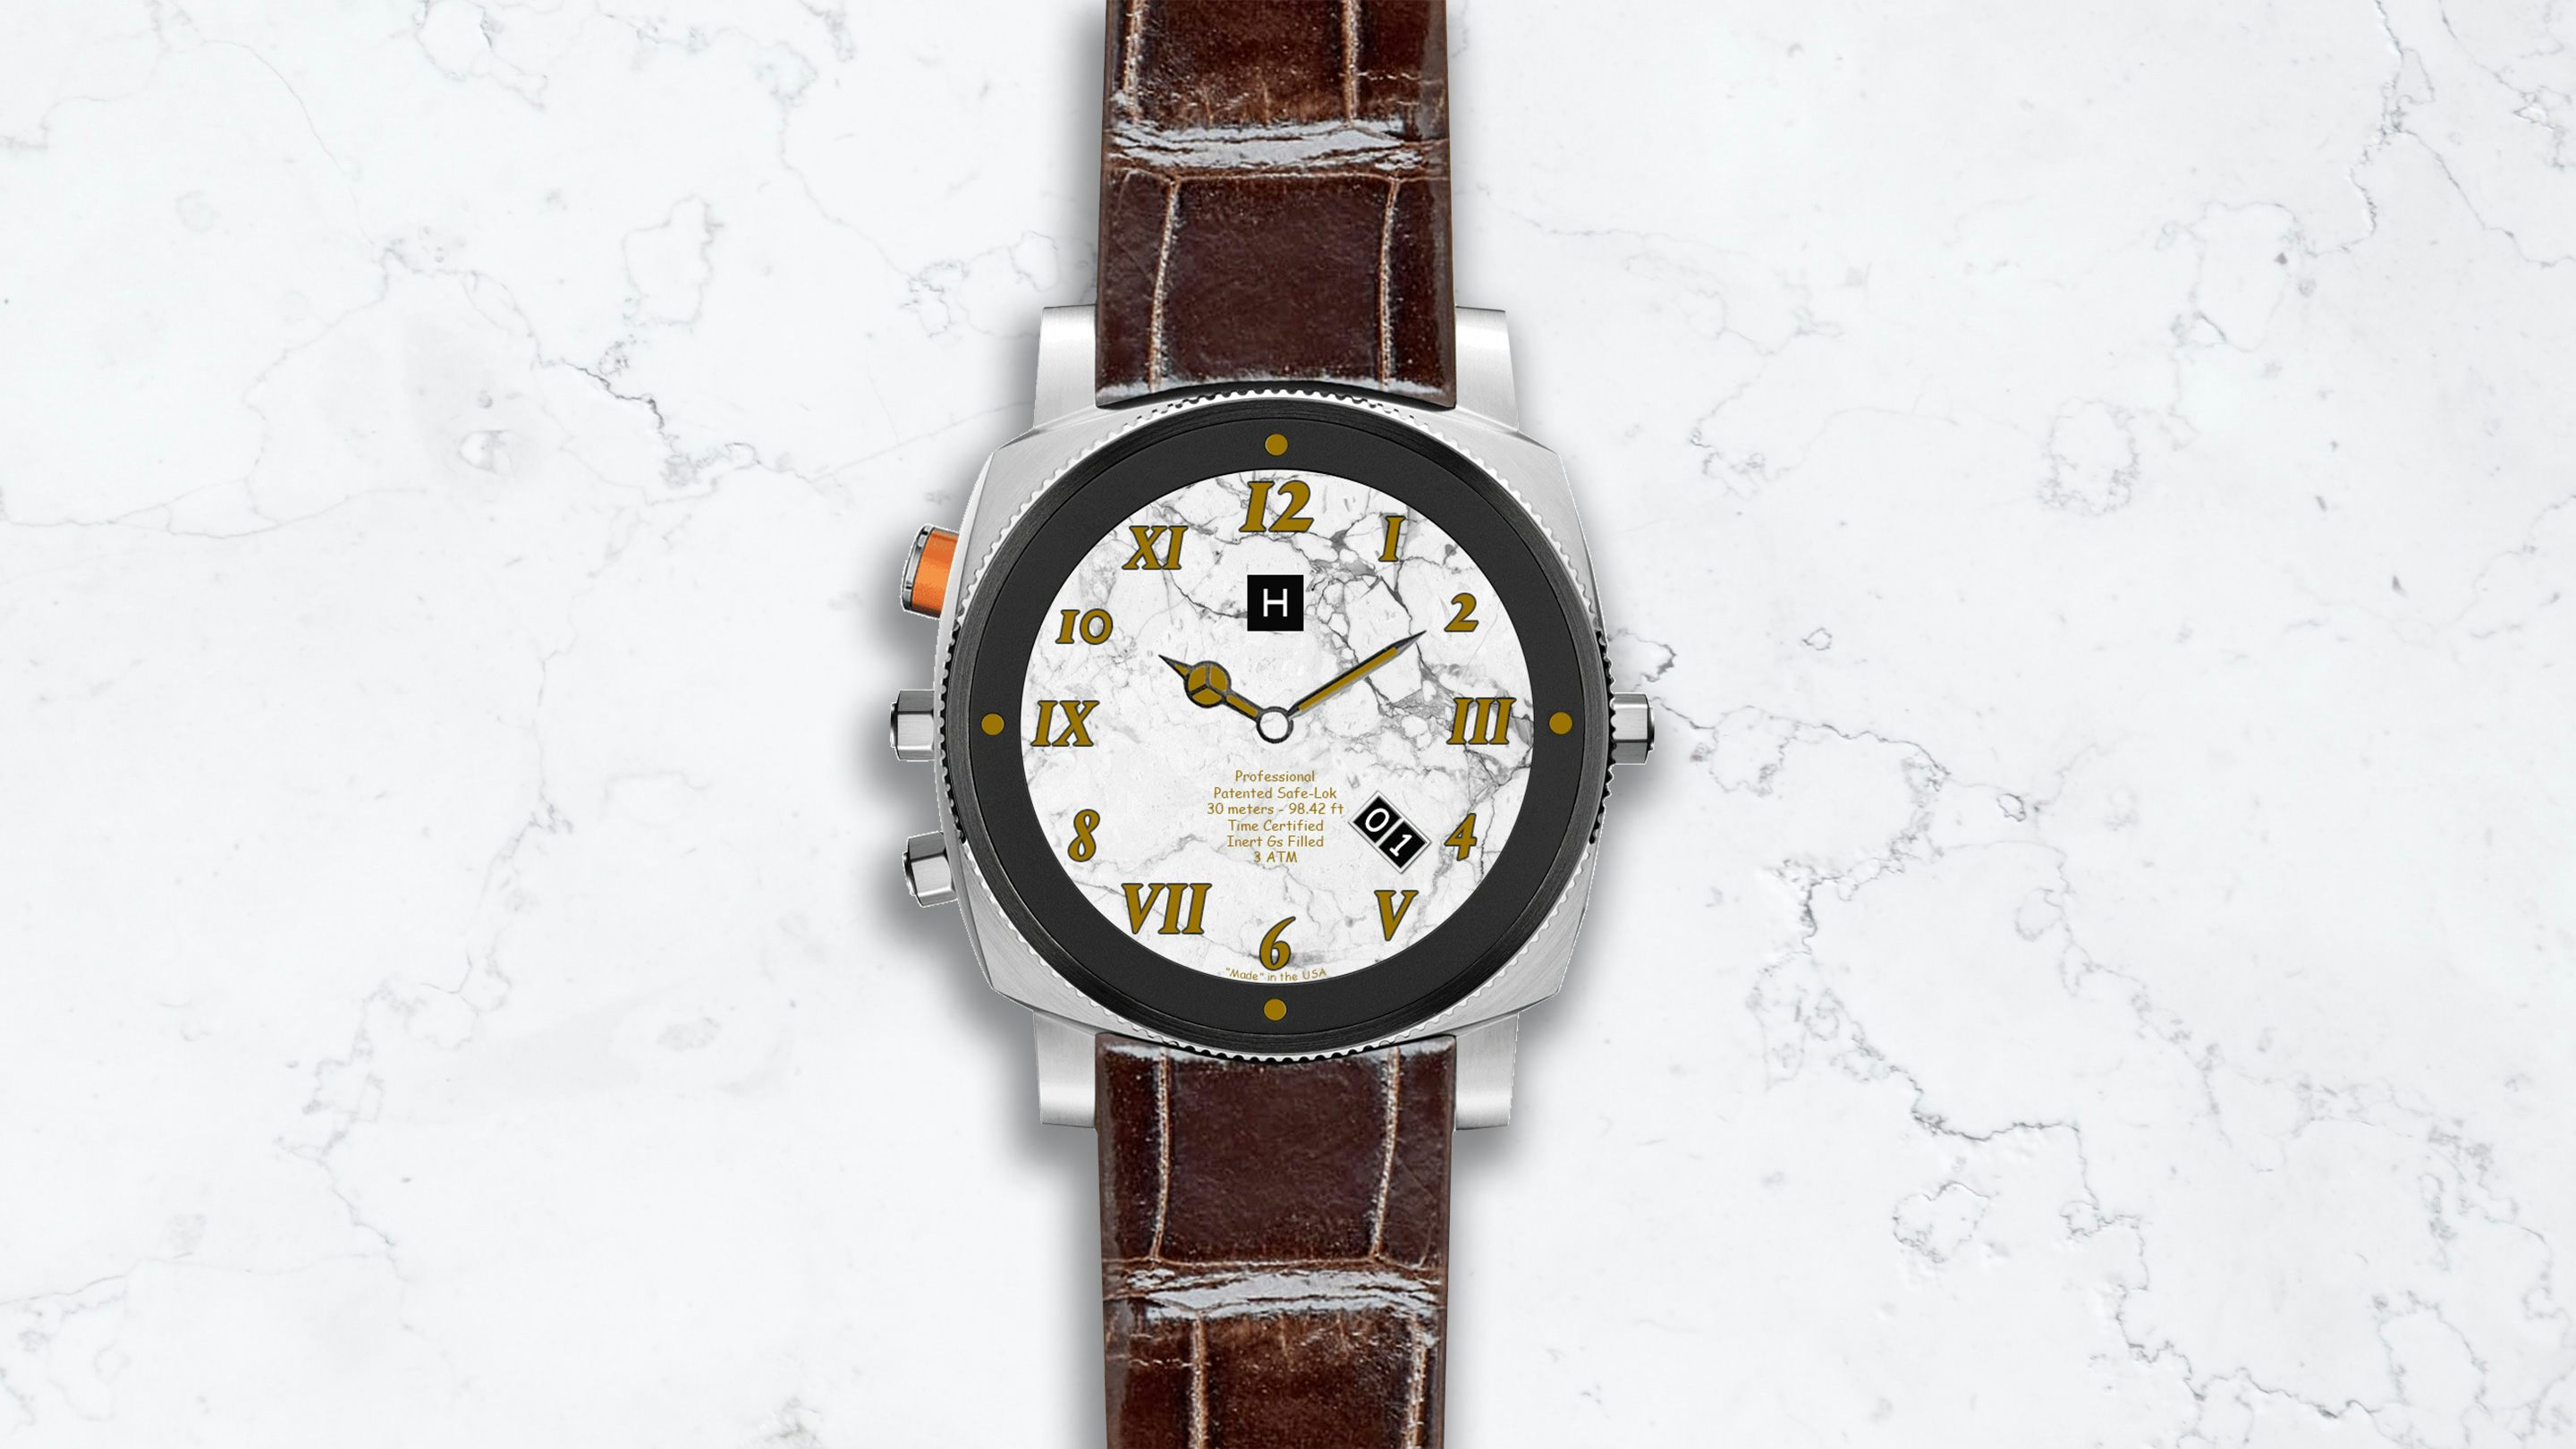 HODINKEE's Jack Forster's Long Term Wear Experience With The Chanel J12